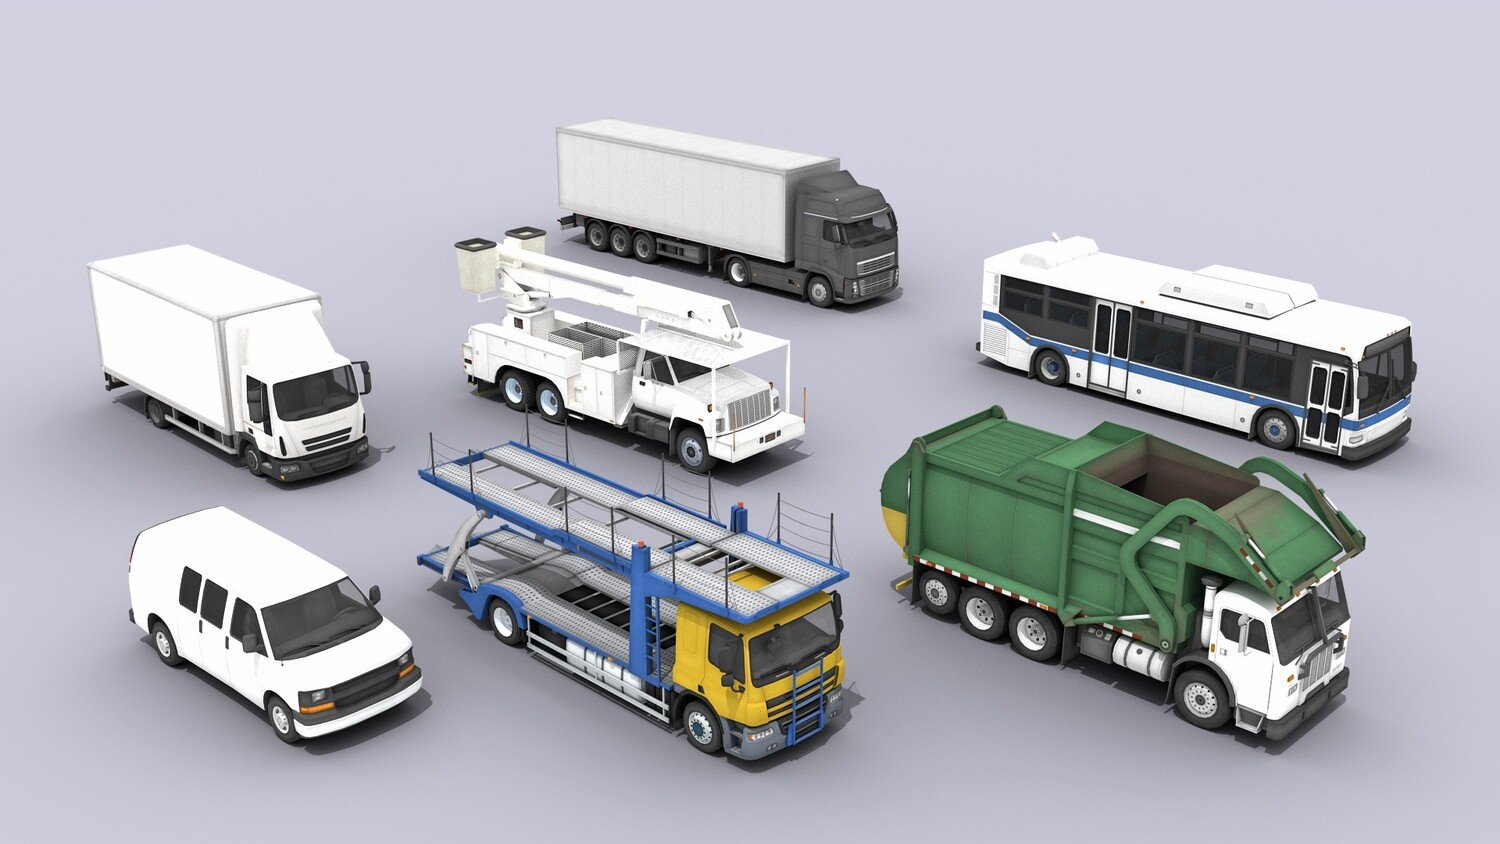 7 Cars and Trucks 3D Model Collection